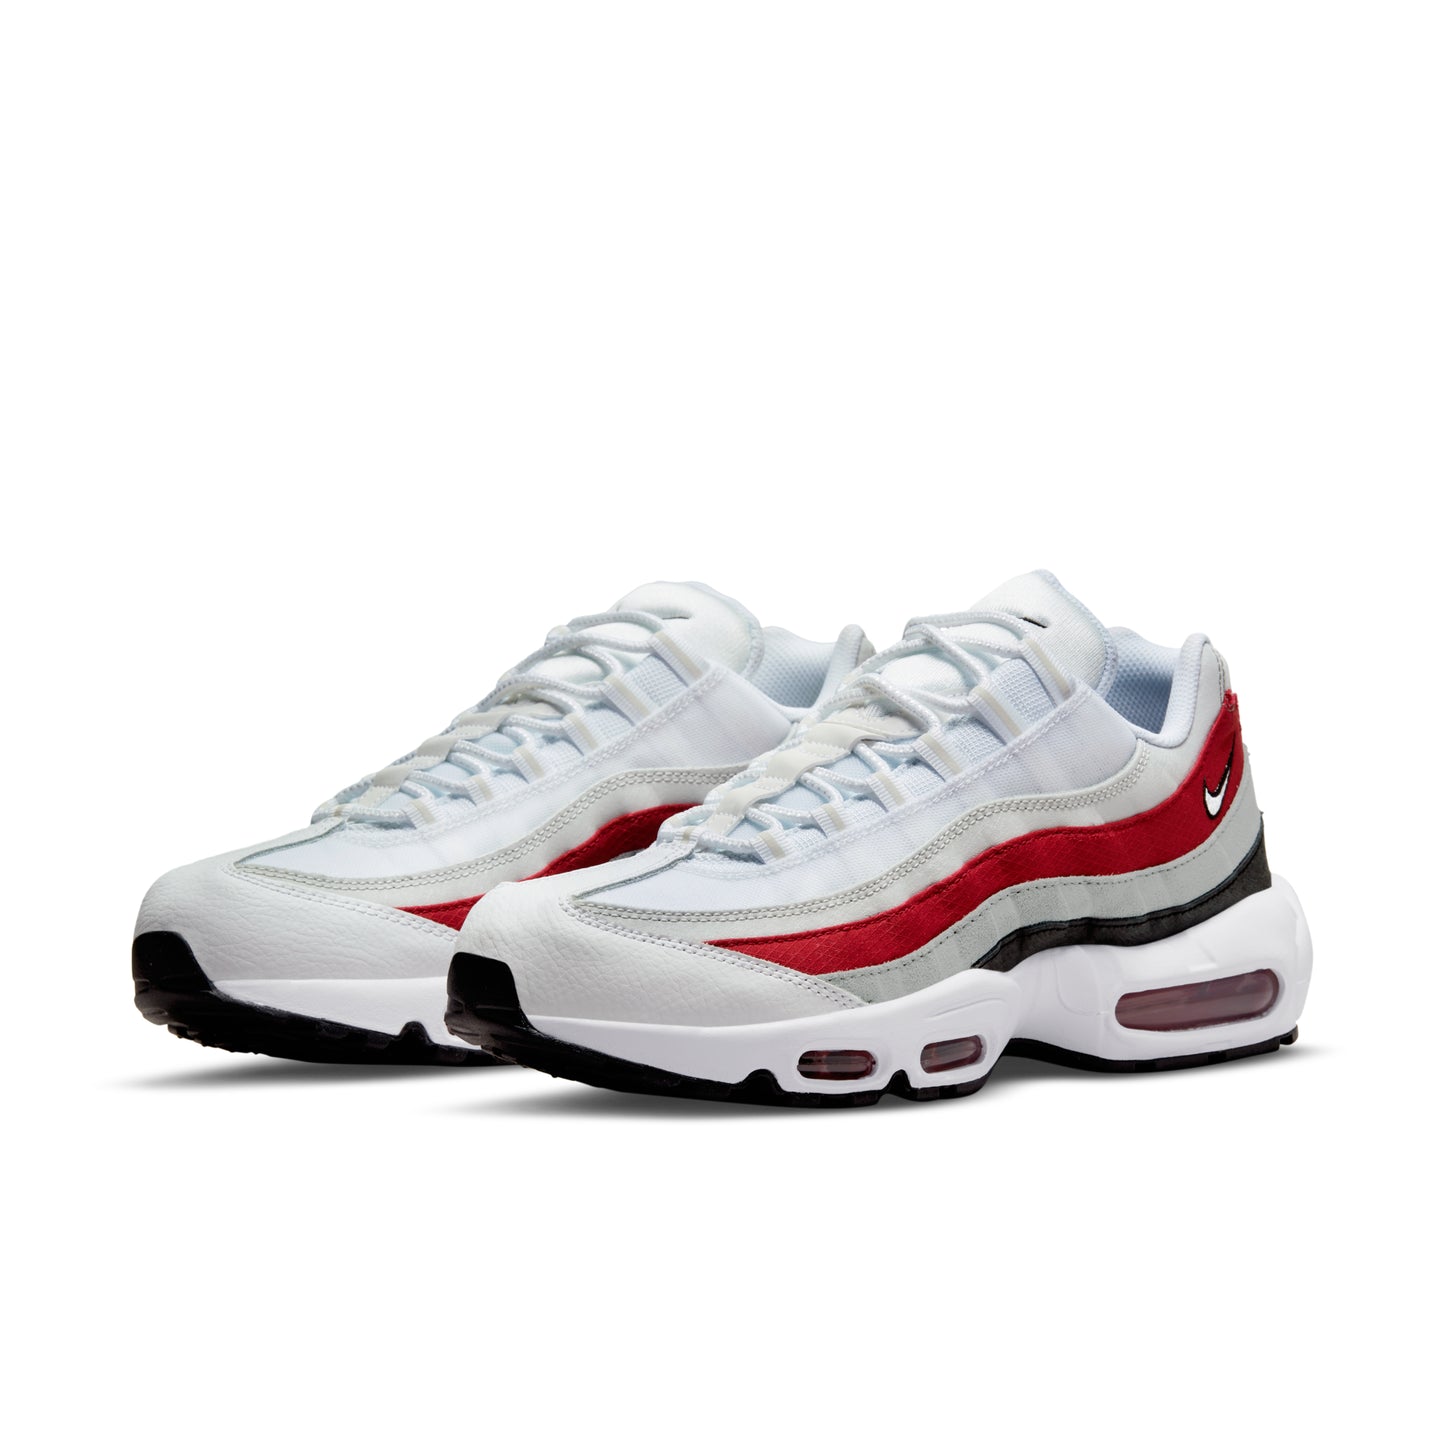 Nike AirMax 95 White Varsity Red Particle Gray